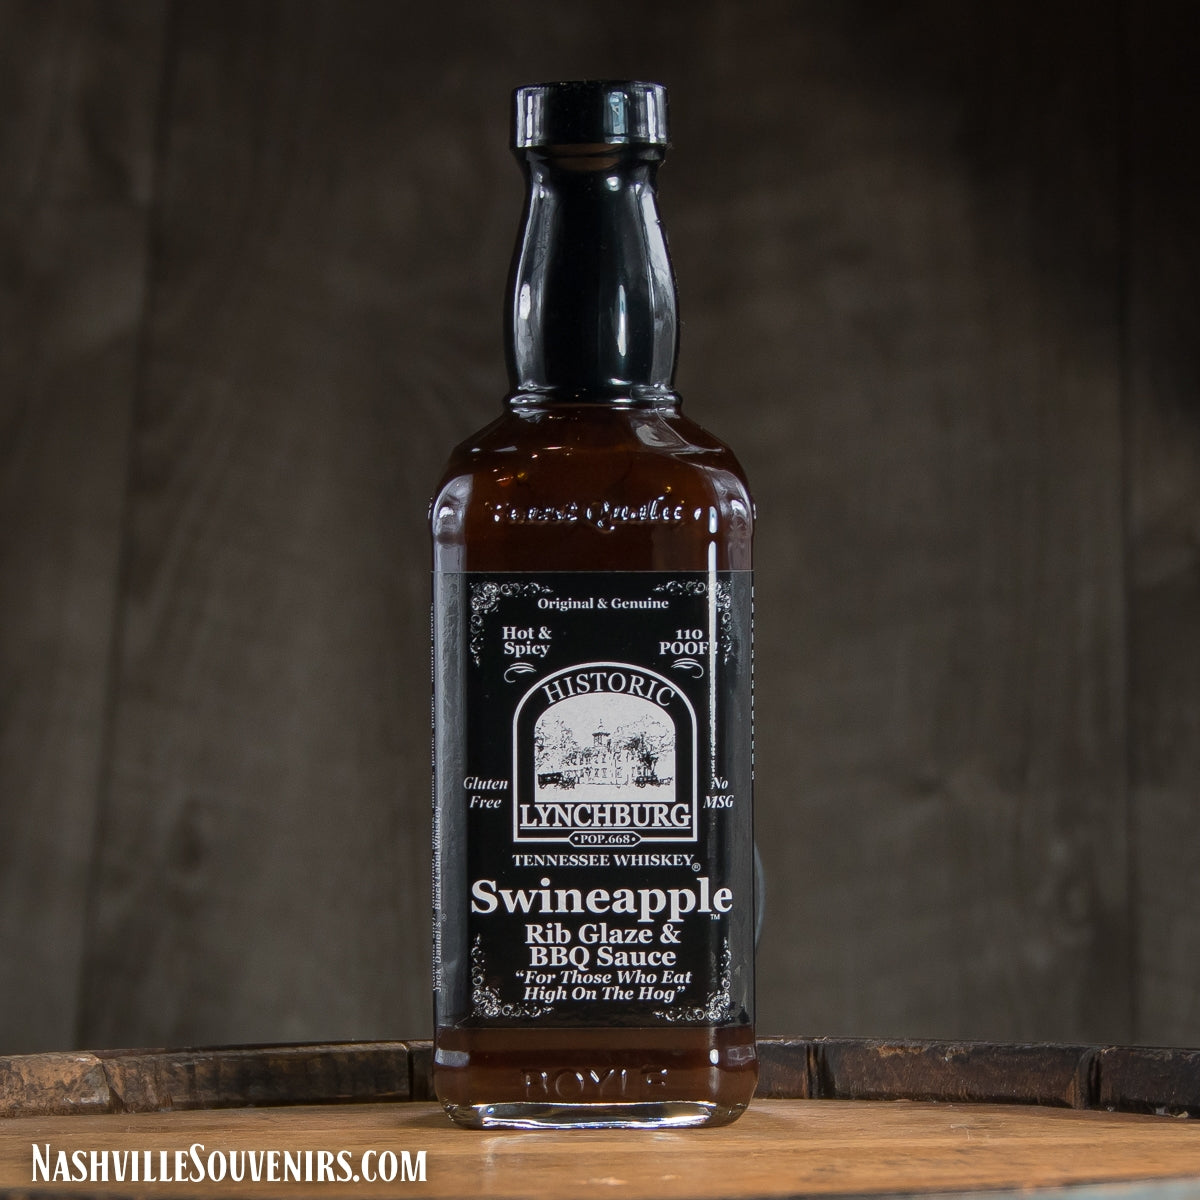 Historic Lynchburg Swineapple BBQ Sauce and Rib Glaze in the hot flavor containing real Jack Daniels Whiskey! This great concoction is made from family recipes over a century old. FREE SHIPPING on all US orders over $75!